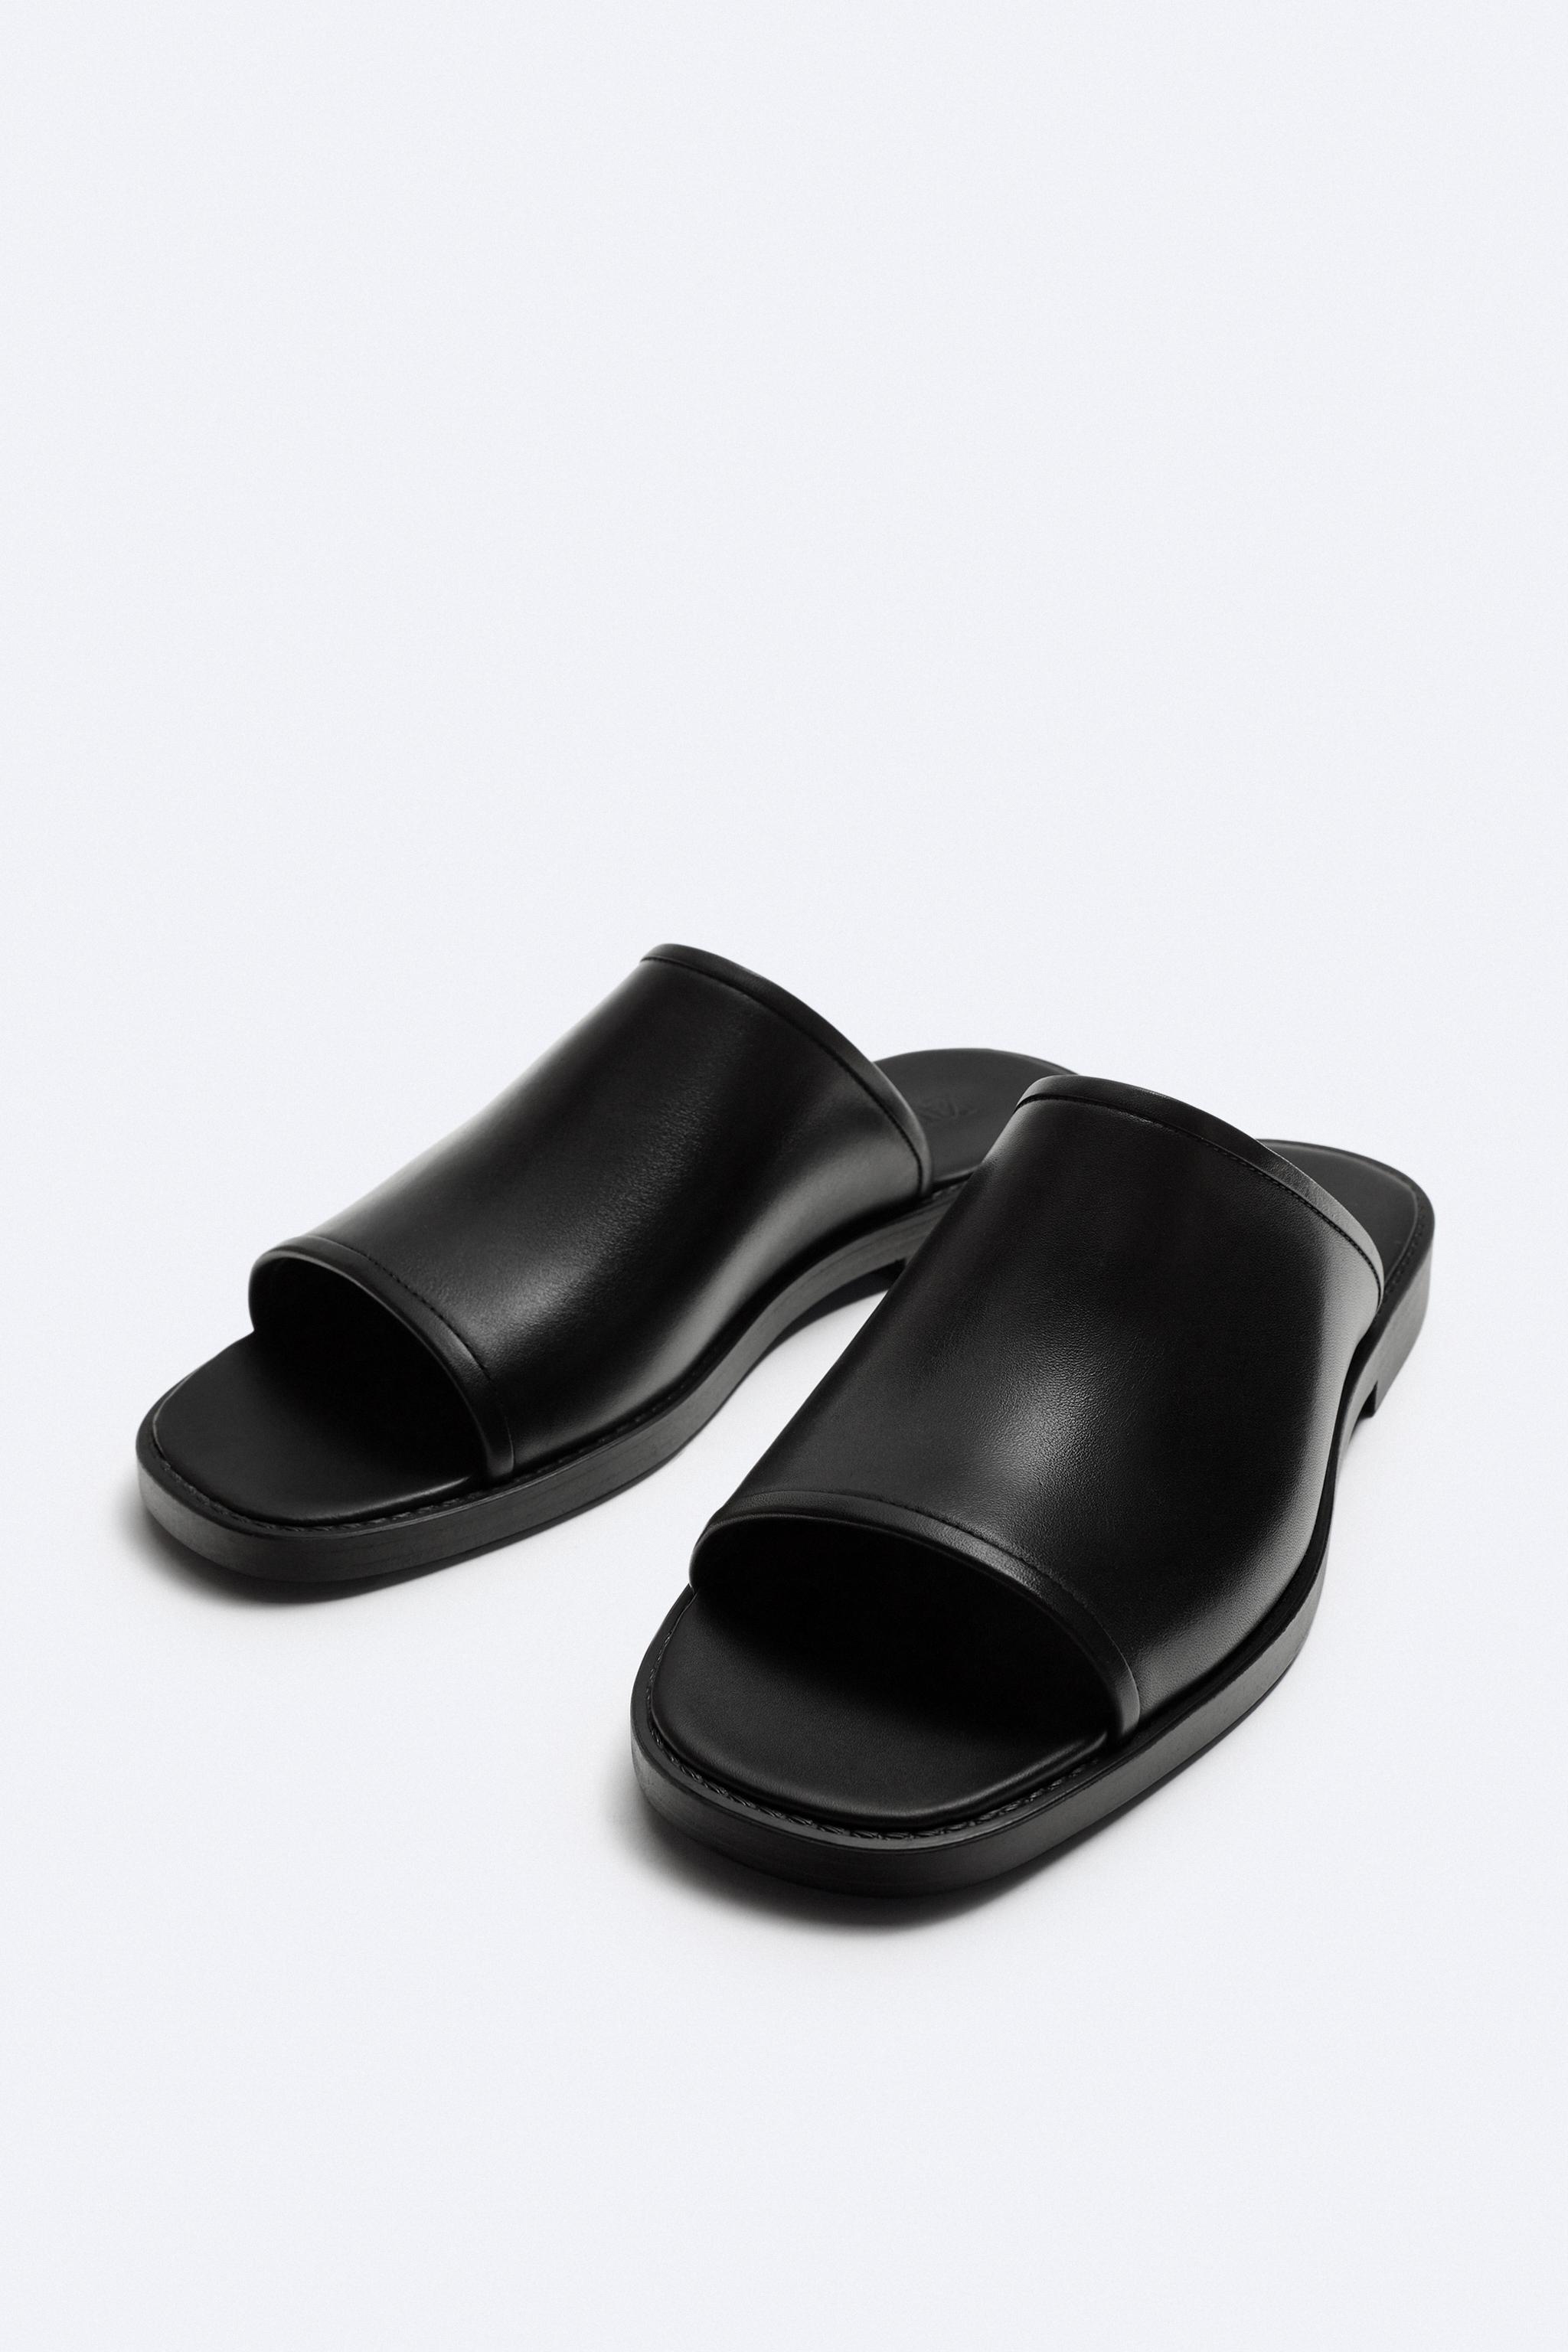 LEATHER SANDALS LIMITED EDITION